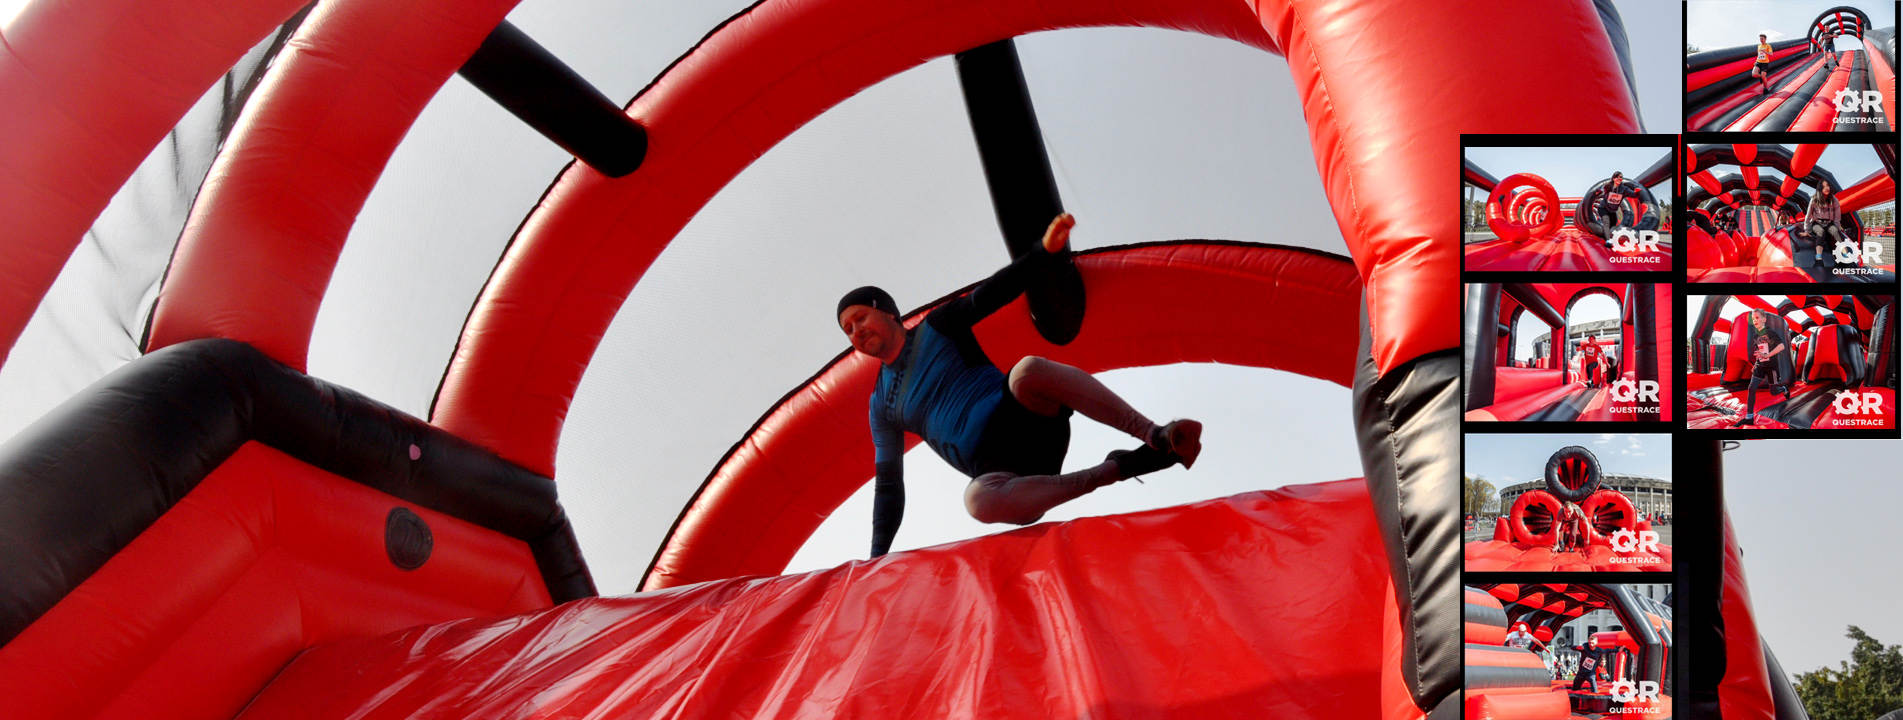 Giant Inflatable Obstacles Course 